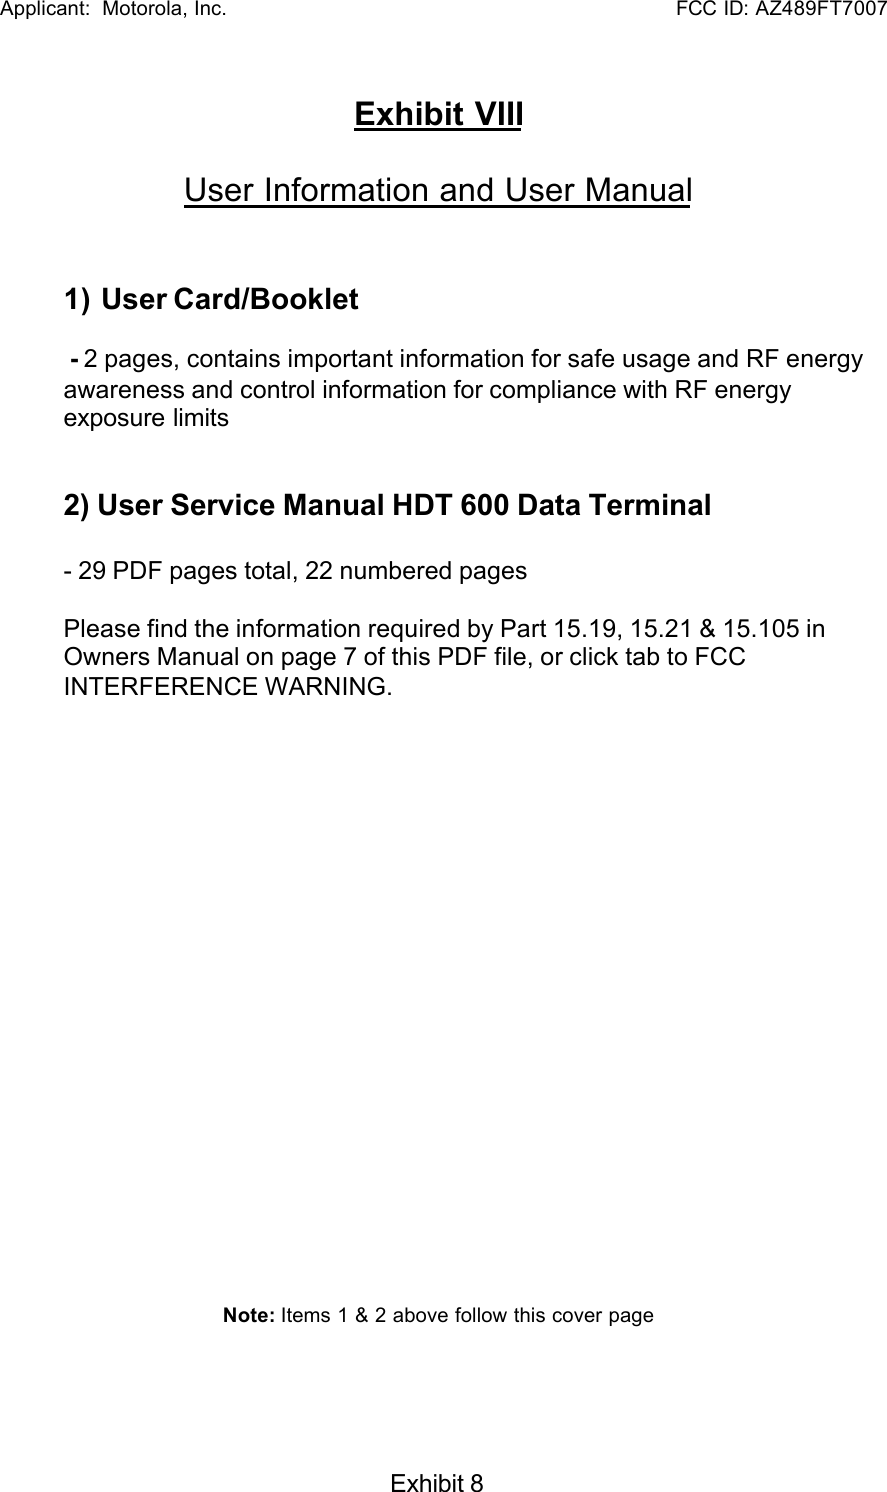   Applicant:  Motorola, Inc.                                                      FCC ID: AZ489FT7007Exhibit 8Exhibit VIIIUser Information and User Manual1) User Card/Booklet - 2 pages, contains important information for safe usage and RF energyawareness and control information for compliance with RF energyexposure limits2) User Service Manual HDT 600 Data Terminal- 29 PDF pages total, 22 numbered pagesPlease find the information required by Part 15.19, 15.21 &amp; 15.105 inOwners Manual on page 7 of this PDF file, or click tab to FCCINTERFERENCE WARNING.Note: Items 1 &amp; 2 above follow this cover page